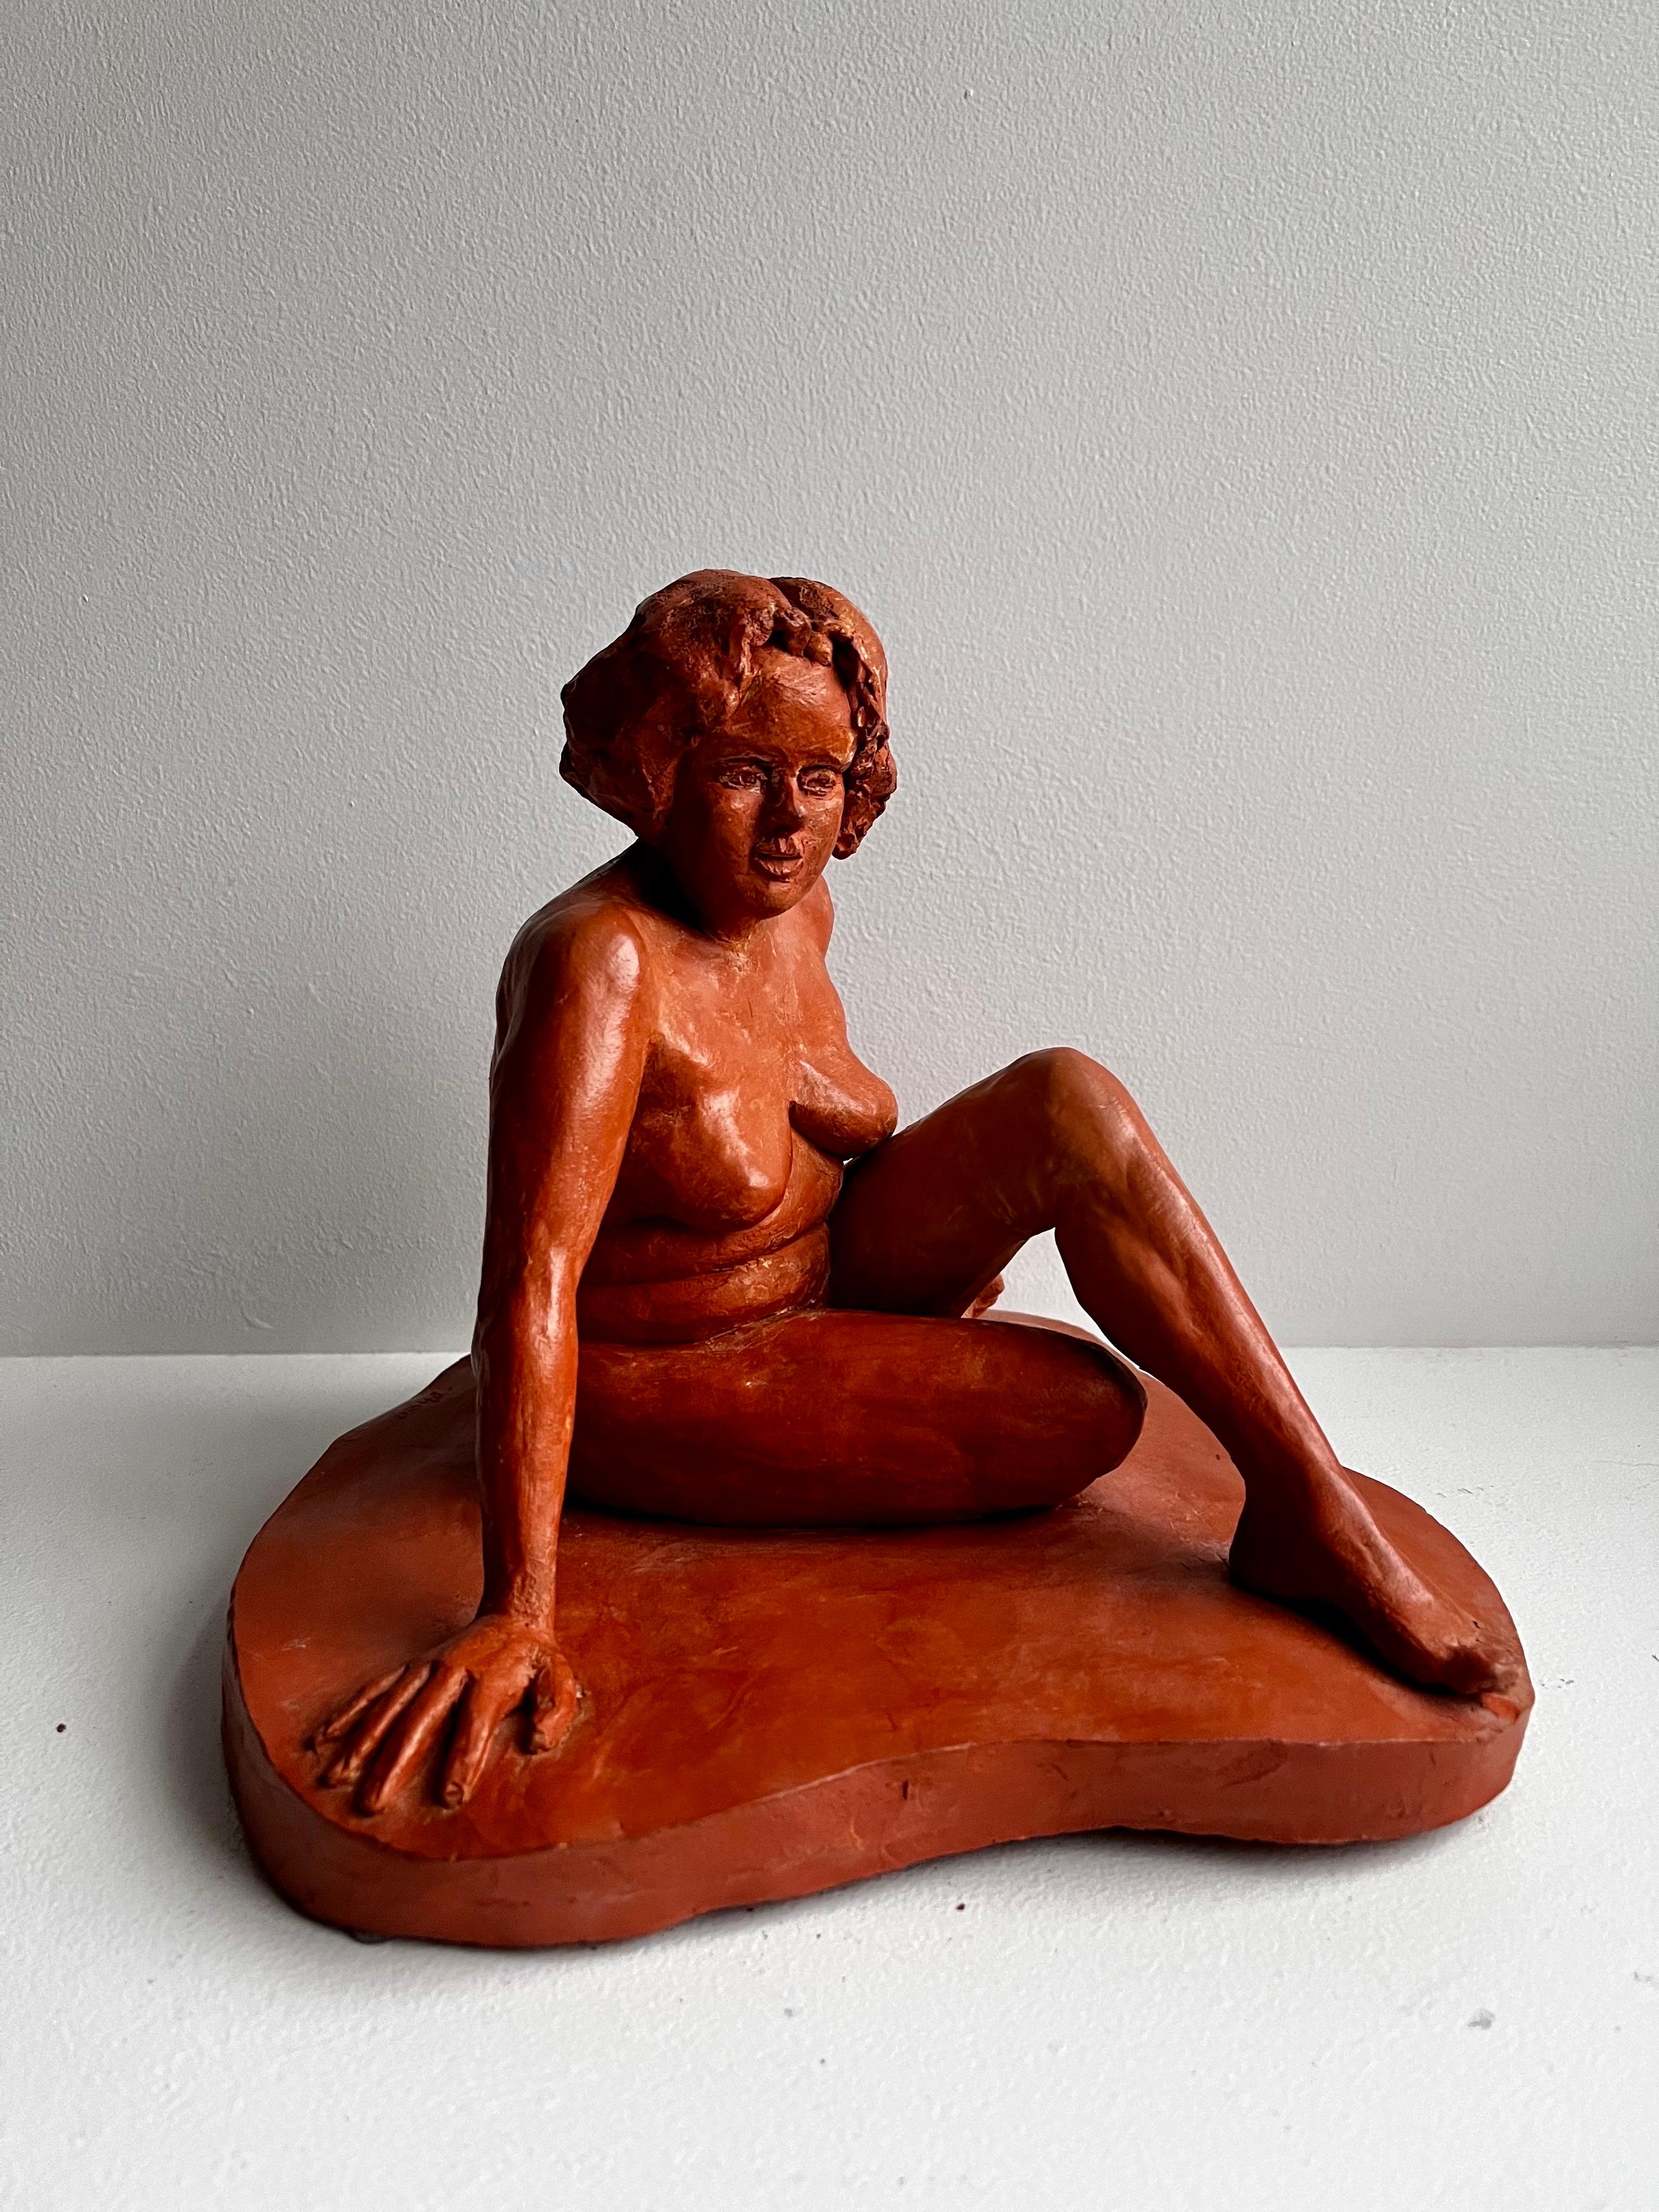 Red Terracotta Sculpture of Seated Nude
circa 1960
signed - artist unknown 

nice color and size
small chip near foot